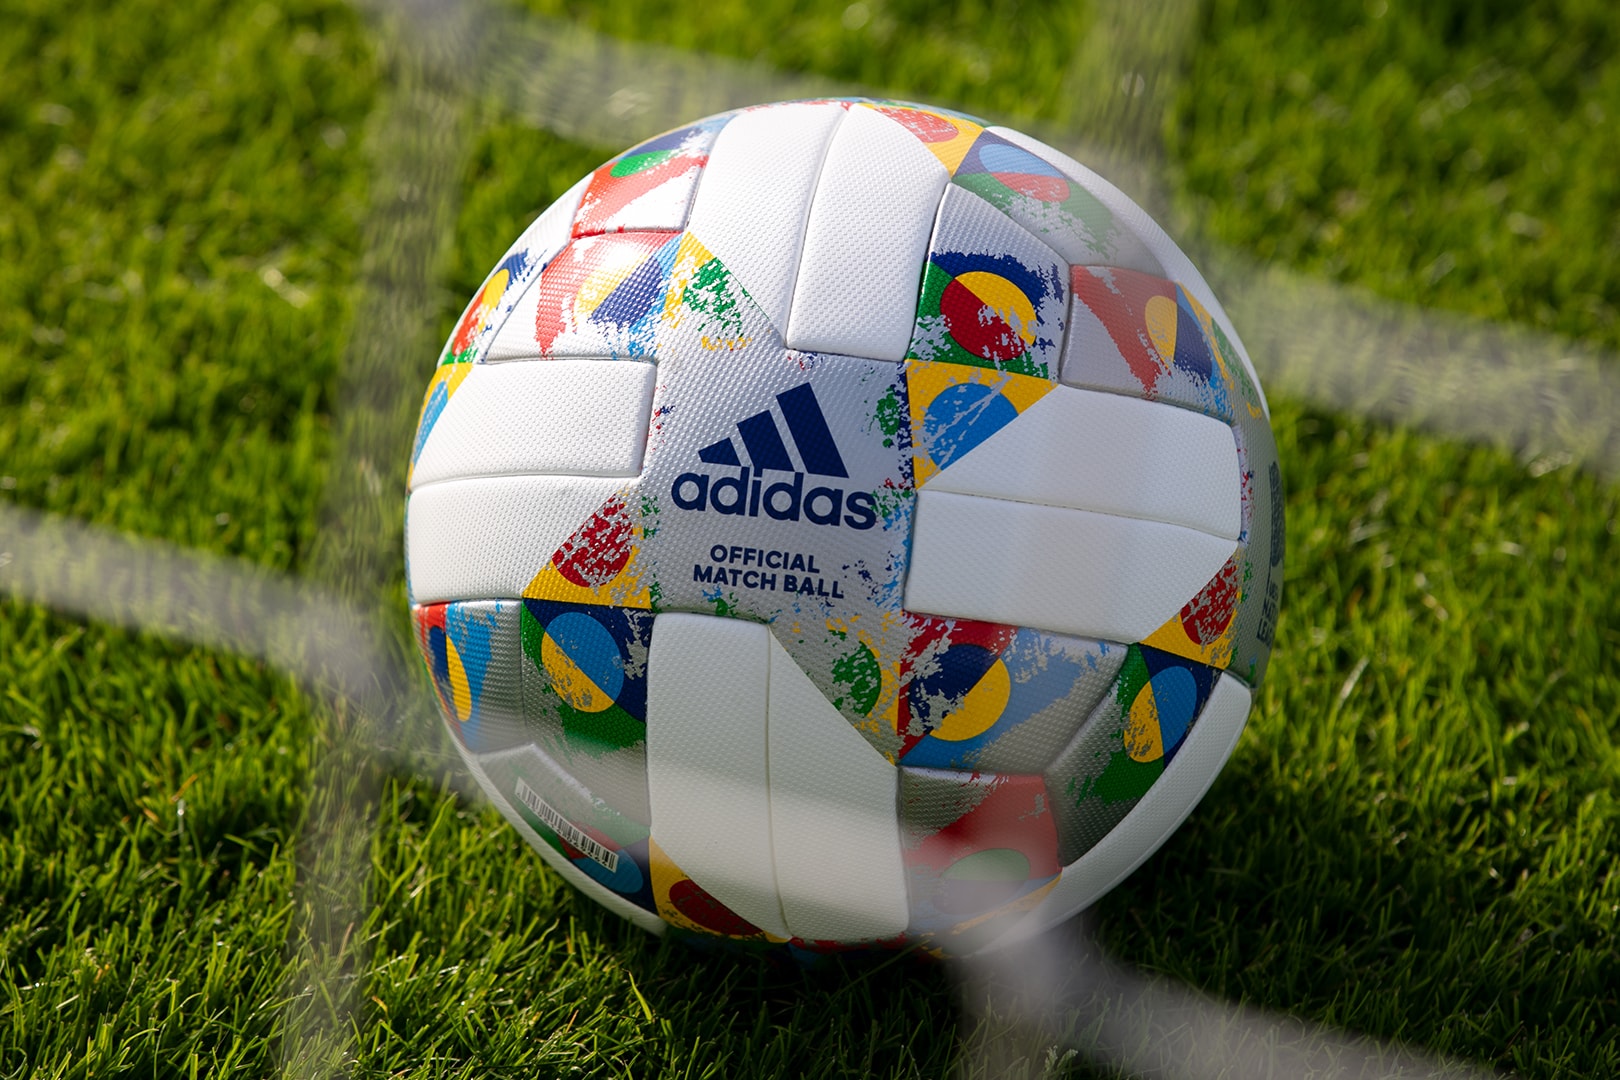 adidas Football Match Ball 2018/19 Nations League Design Unveiling First Look International England Spain Germany France Italy Europe Soccer